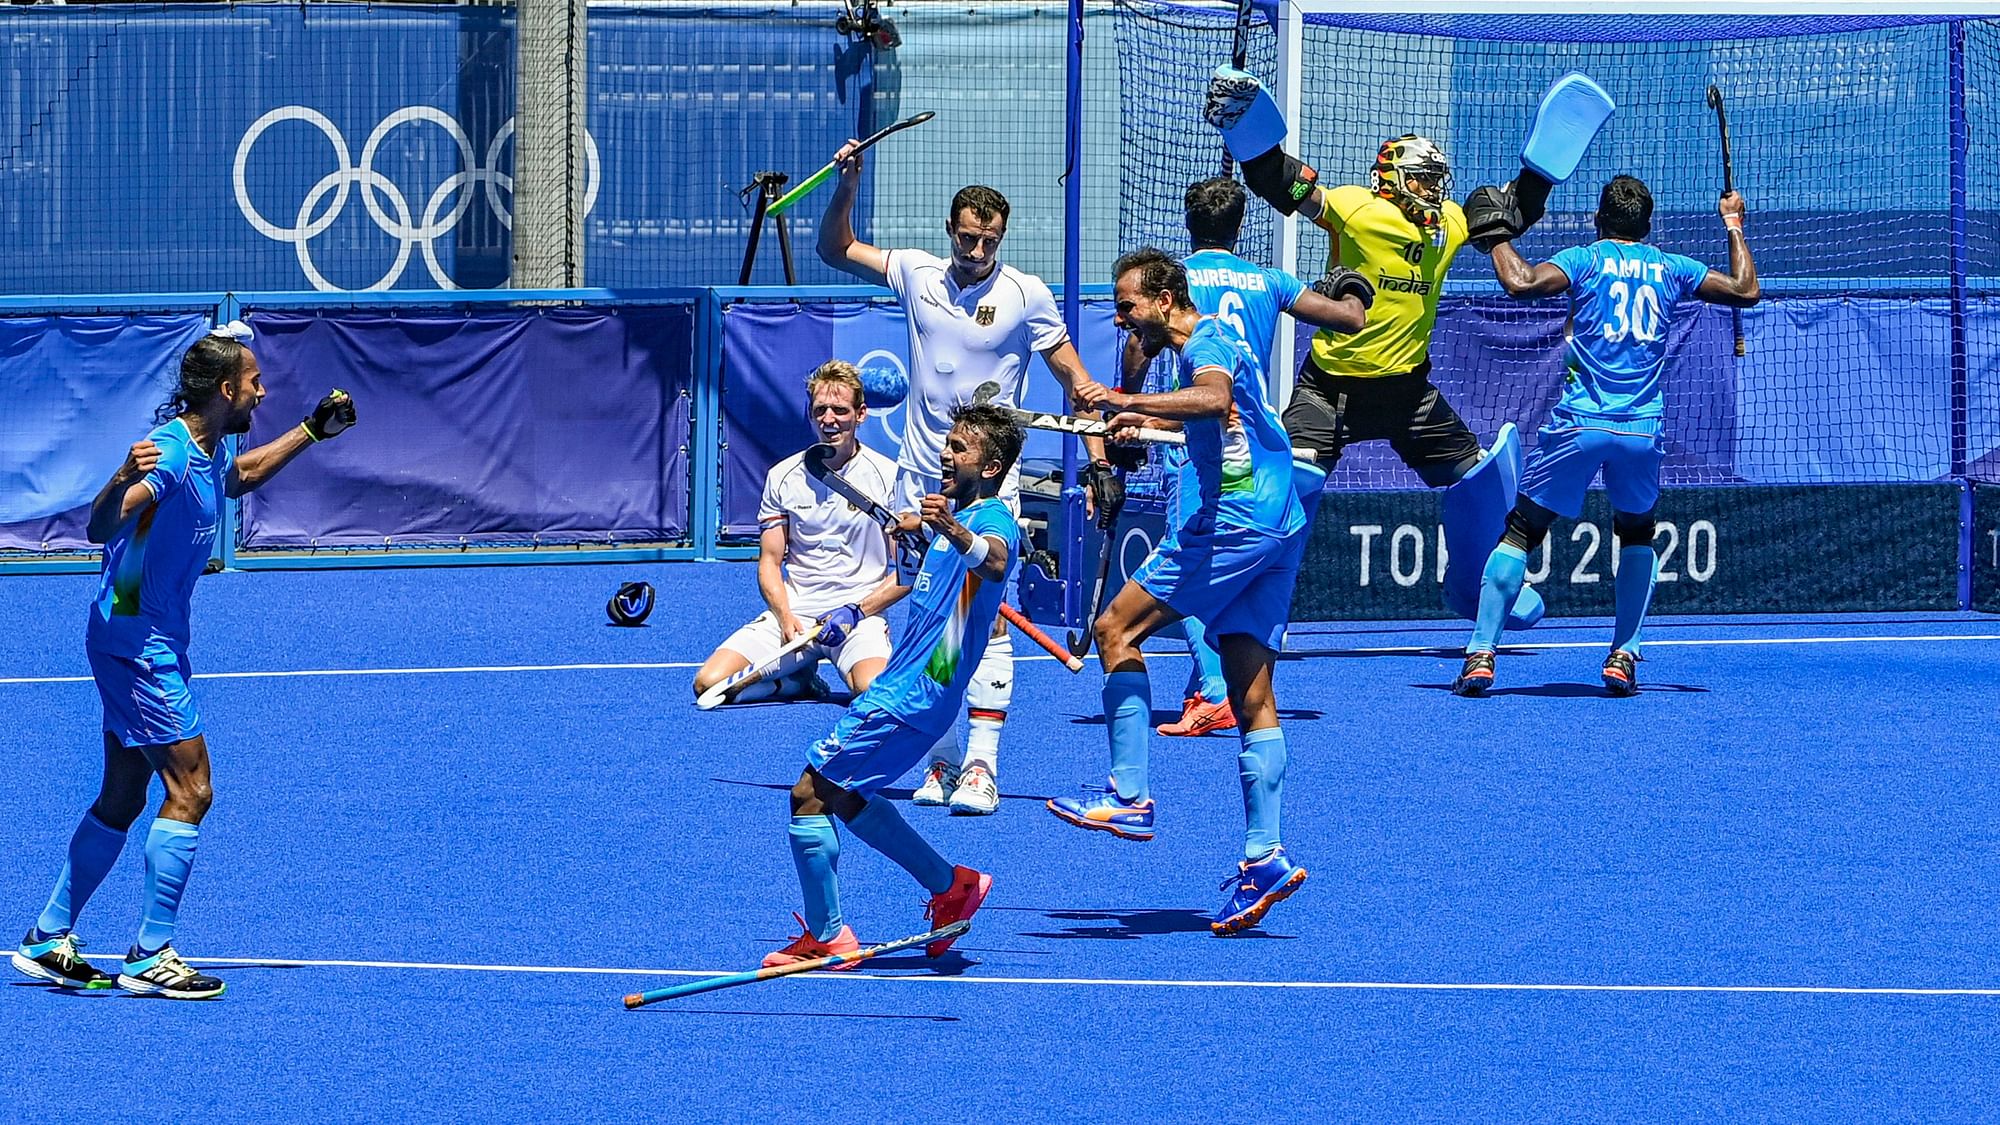 Gurinder Singh to Lead India Men's Team in Hockey 5s Tournament at